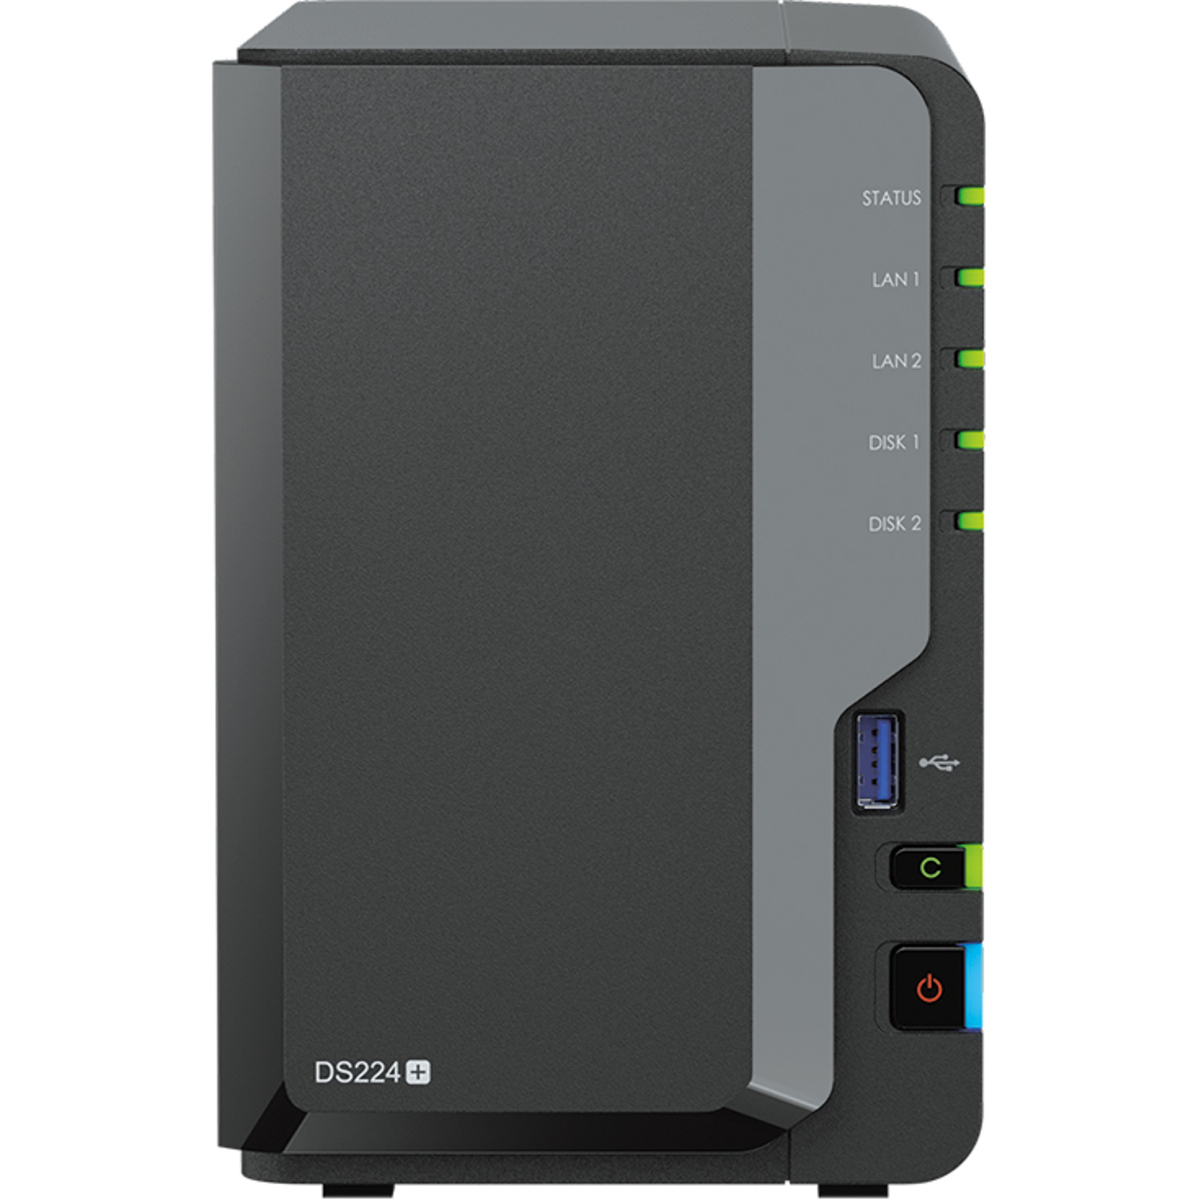 Synology DiskStation DS224+ 32tb 2-Bay Desktop Personal / Basic Home / Small Office NAS - Network Attached Storage Device 2x16tb TeamGroup EX2 Elite T253E2016T0C101 2.5 550/520MB/s SATA 6Gb/s SSD CONSUMER Class Drives Installed - Burn-In Tested - ON SALE - FREE RAM UPGRADE DiskStation DS224+